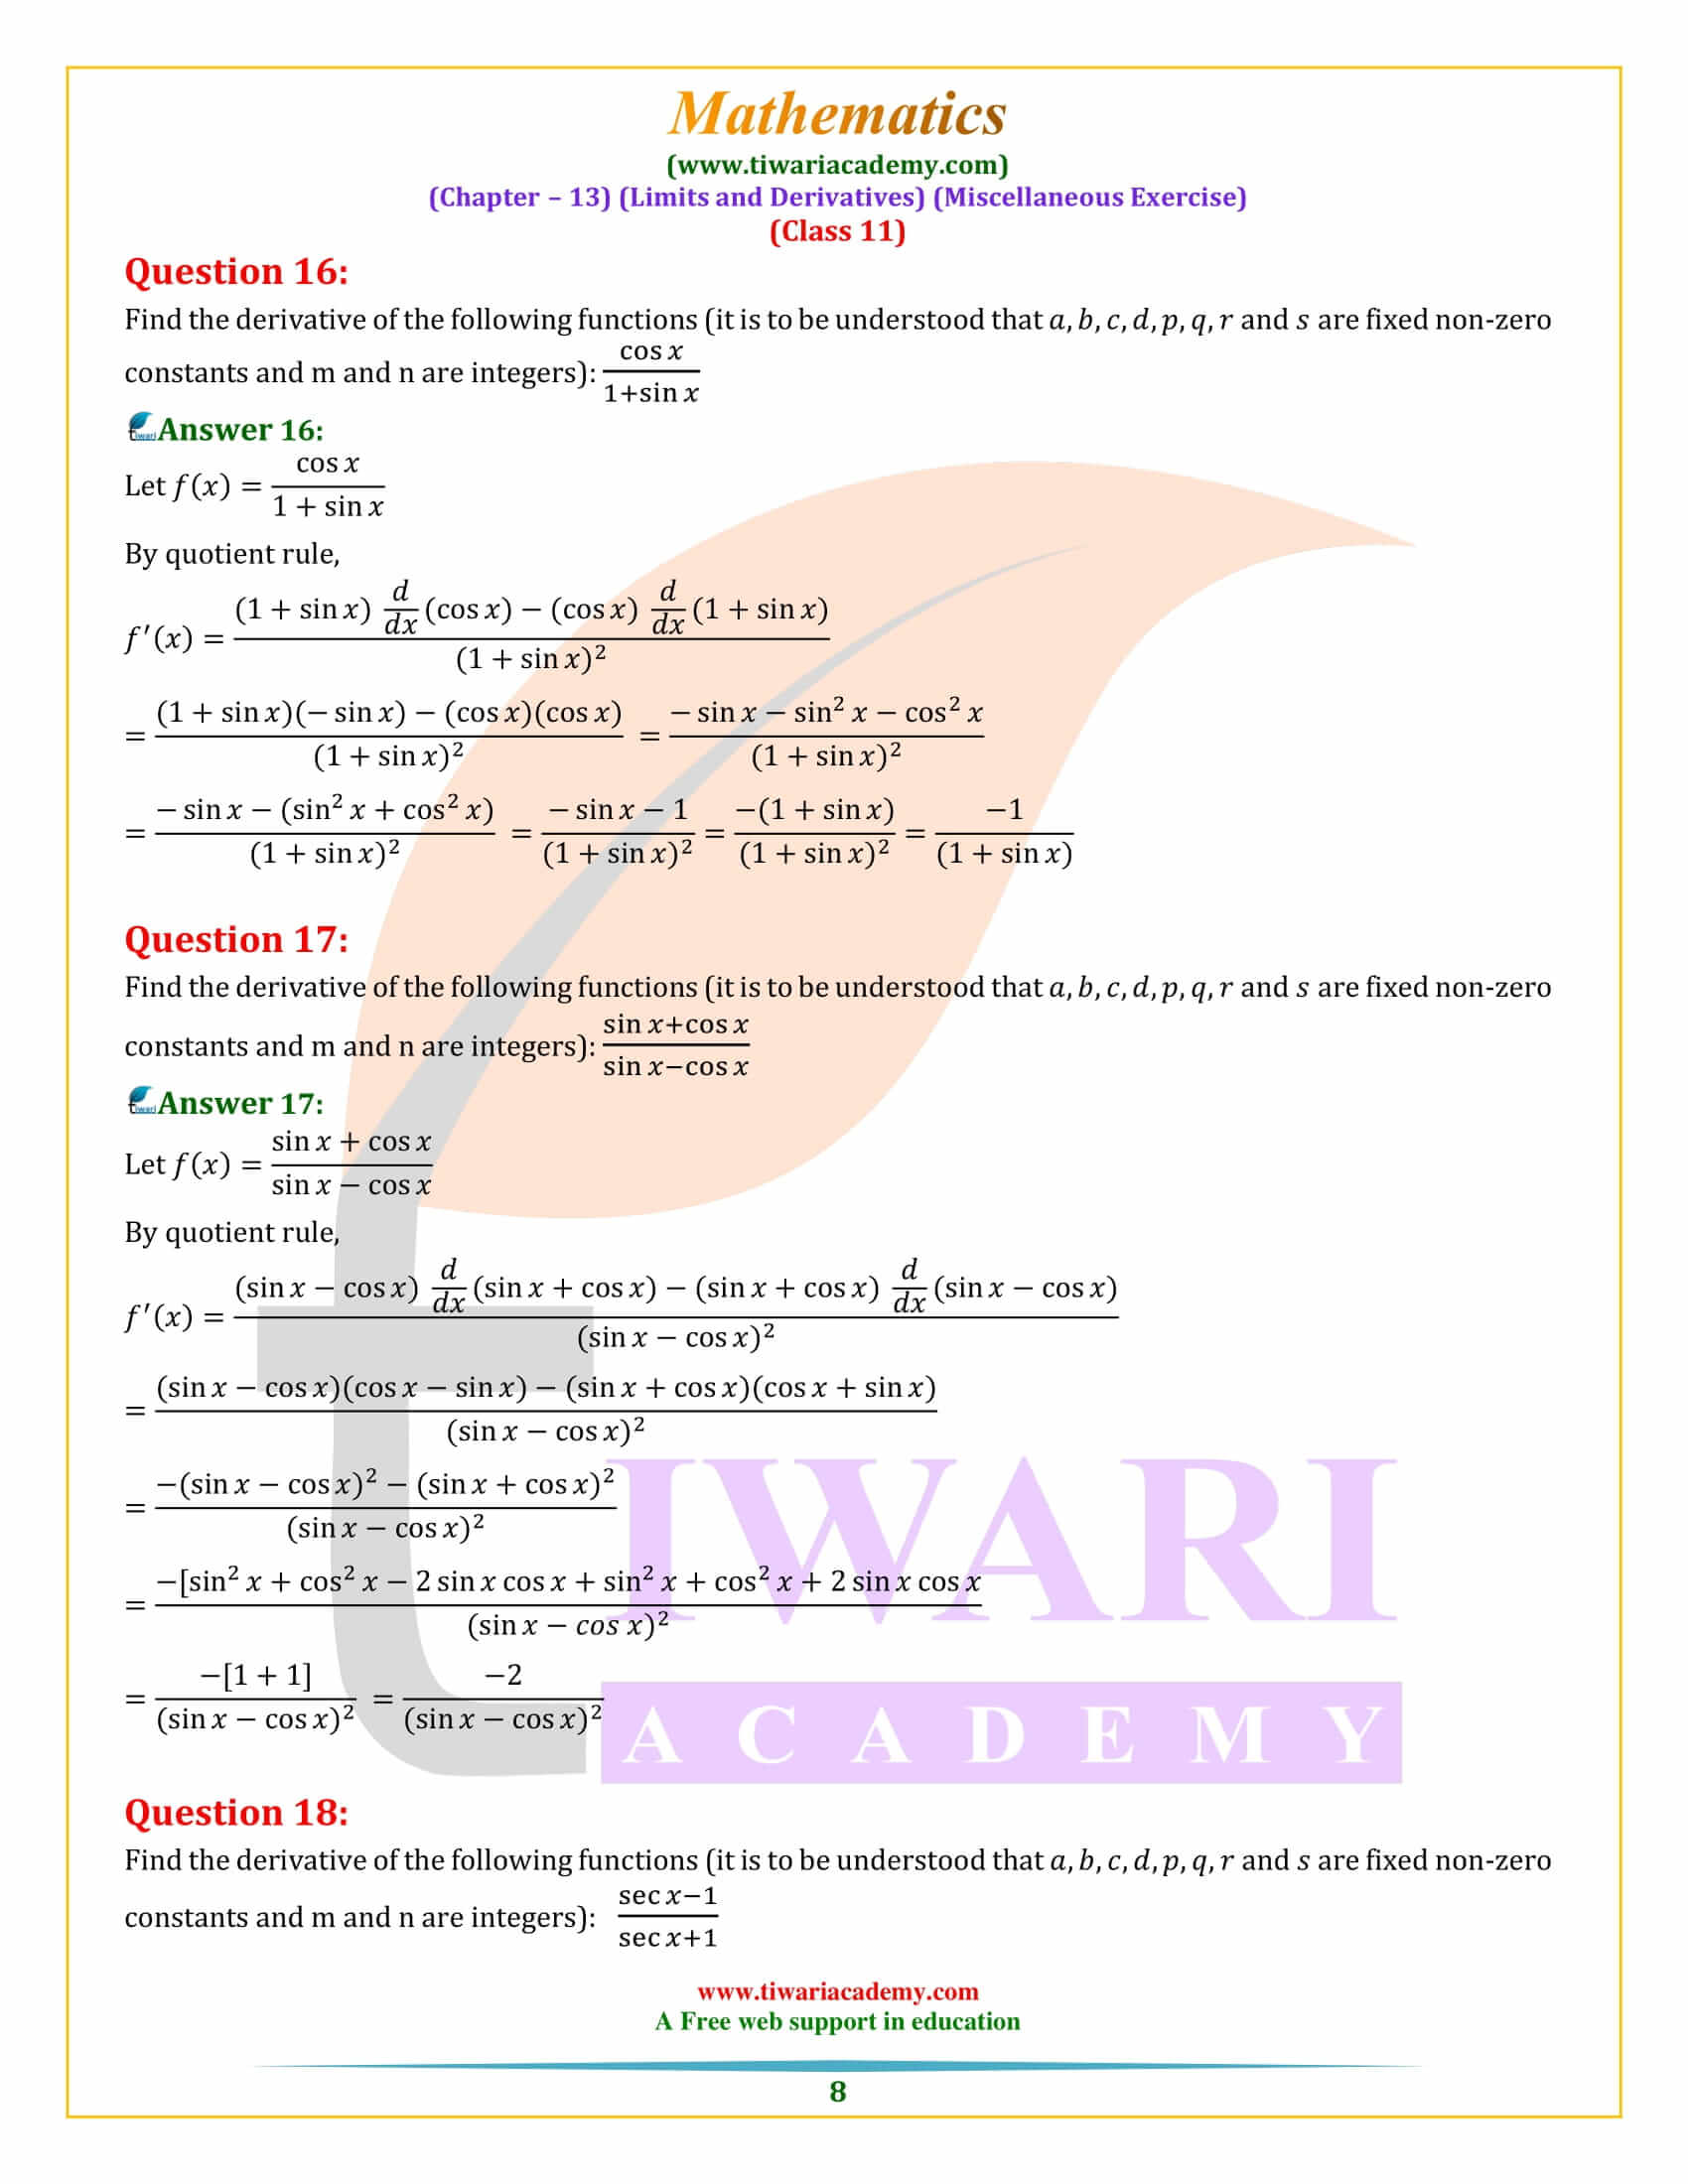 NCERT Solutions for Class 11 Maths Chapter 13 Miscellaneous Exercise free